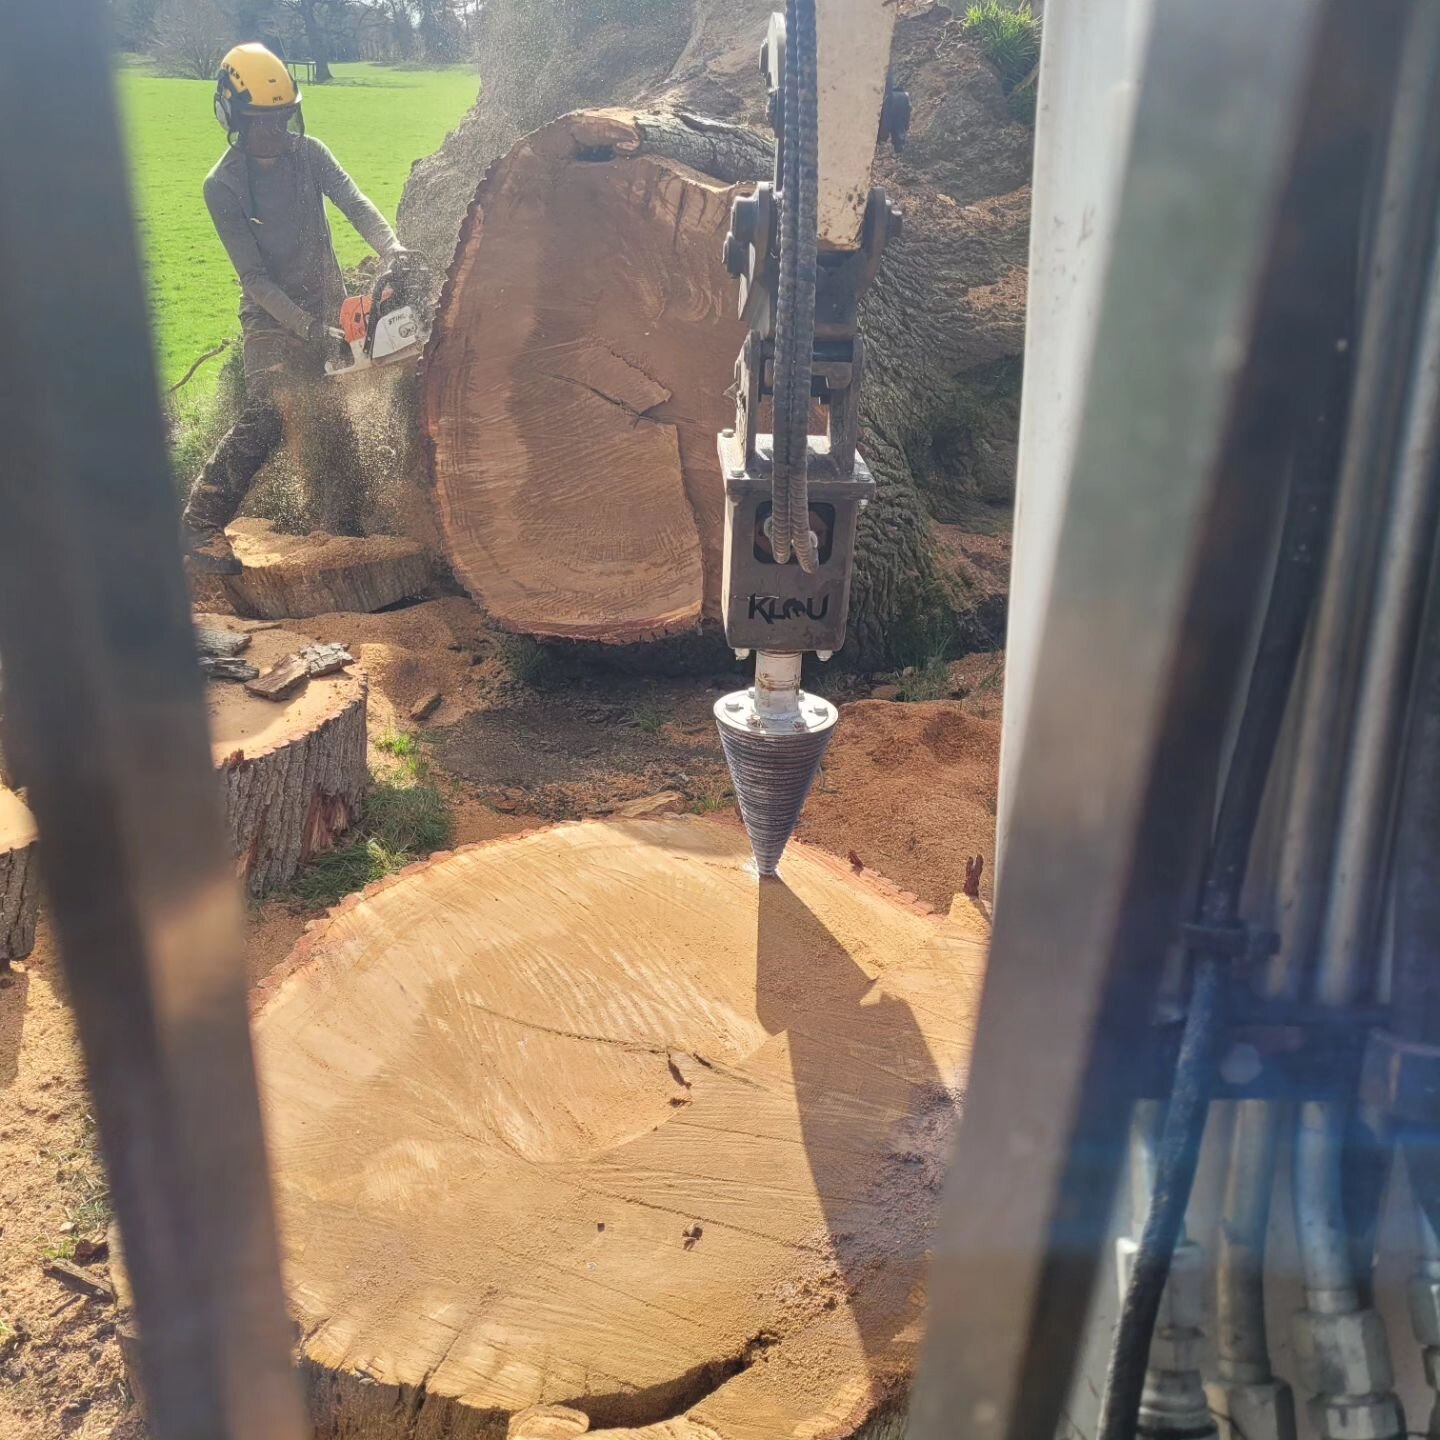 An efficient job processing this fallen oak with a 2-man team. The tree was too far gone for milling, so it will be keeping the customer warm instead. The cone is an invaluable tool for breaking down large diameter rings.
.
.
.
#logs #trees #conespli